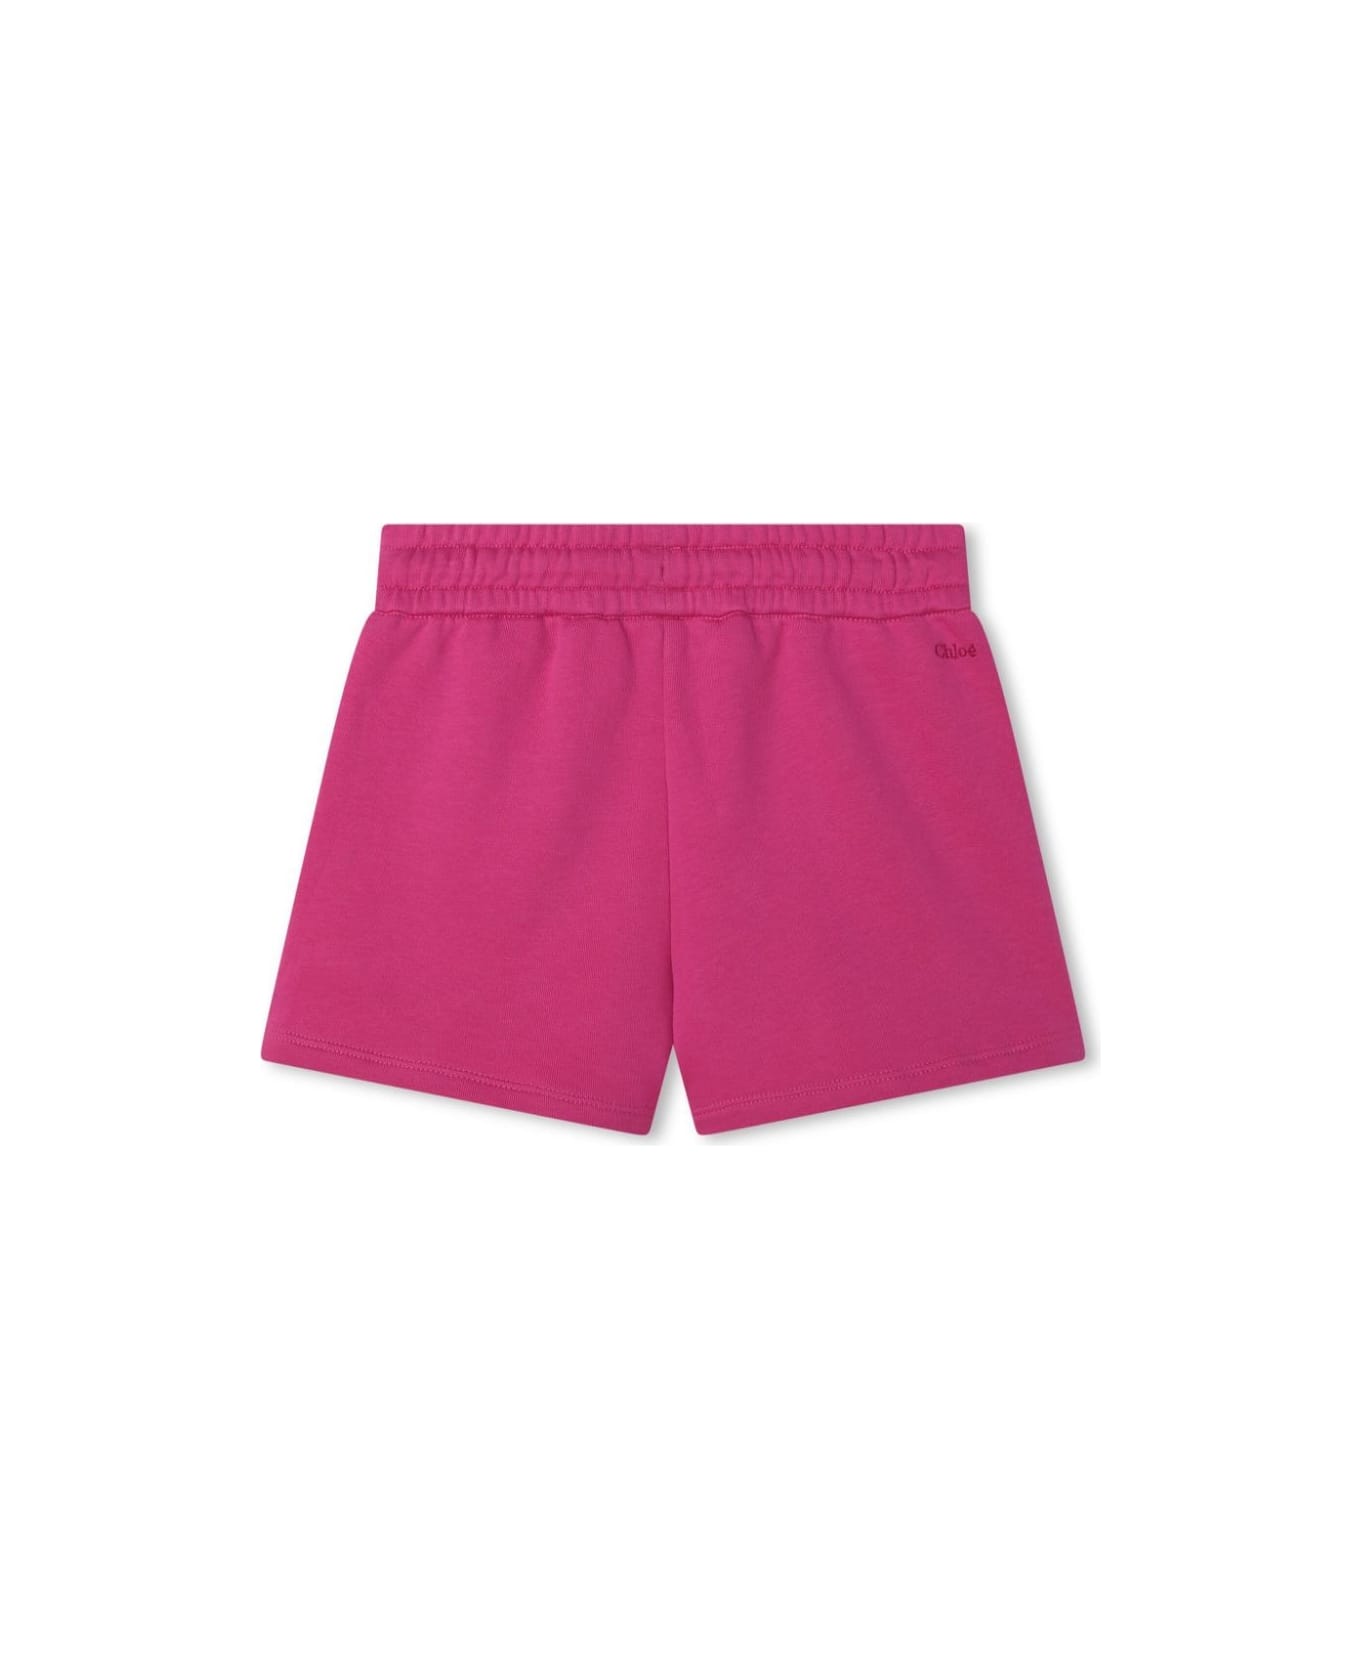 Chloé Fuchsia Sporty Shorts With Studs - Pink